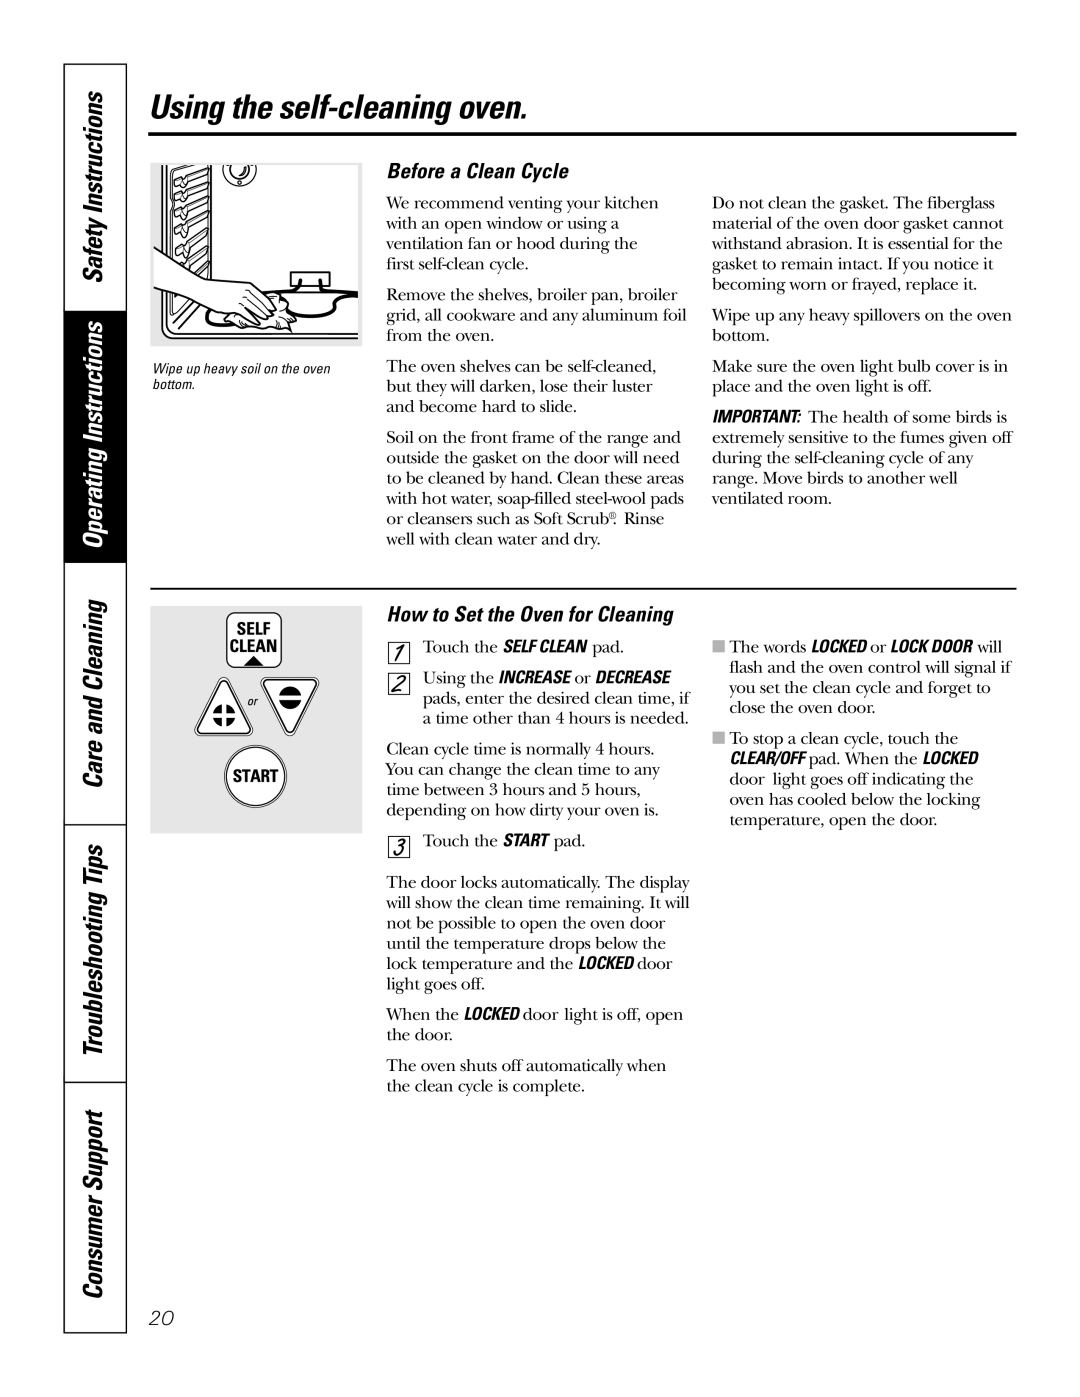 GE JBP82 owner manual Using the self-cleaningoven, Operating Instructions Safety, Before a Clean Cycle 